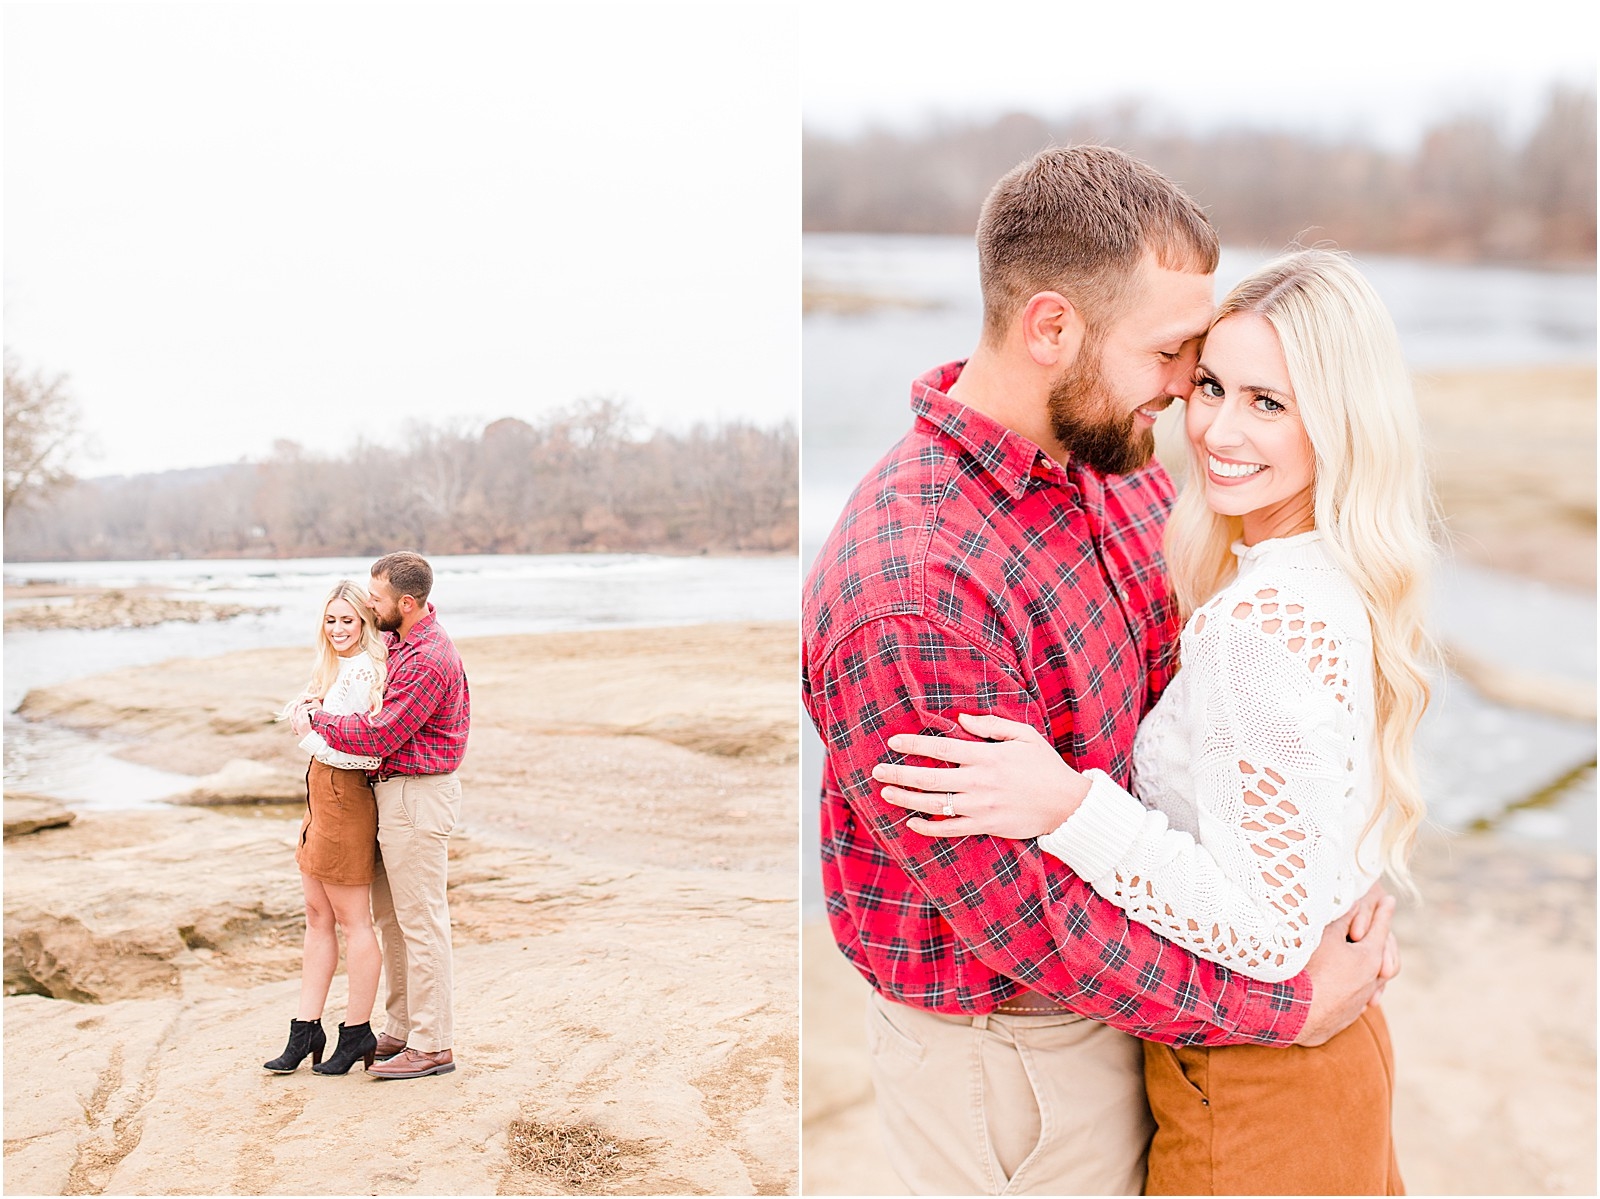 An sweet and snuggly fall anniversary session in Loogootee, Indiana. | #anniversarysession #fallsession #southernindianawedding | 008.jpg